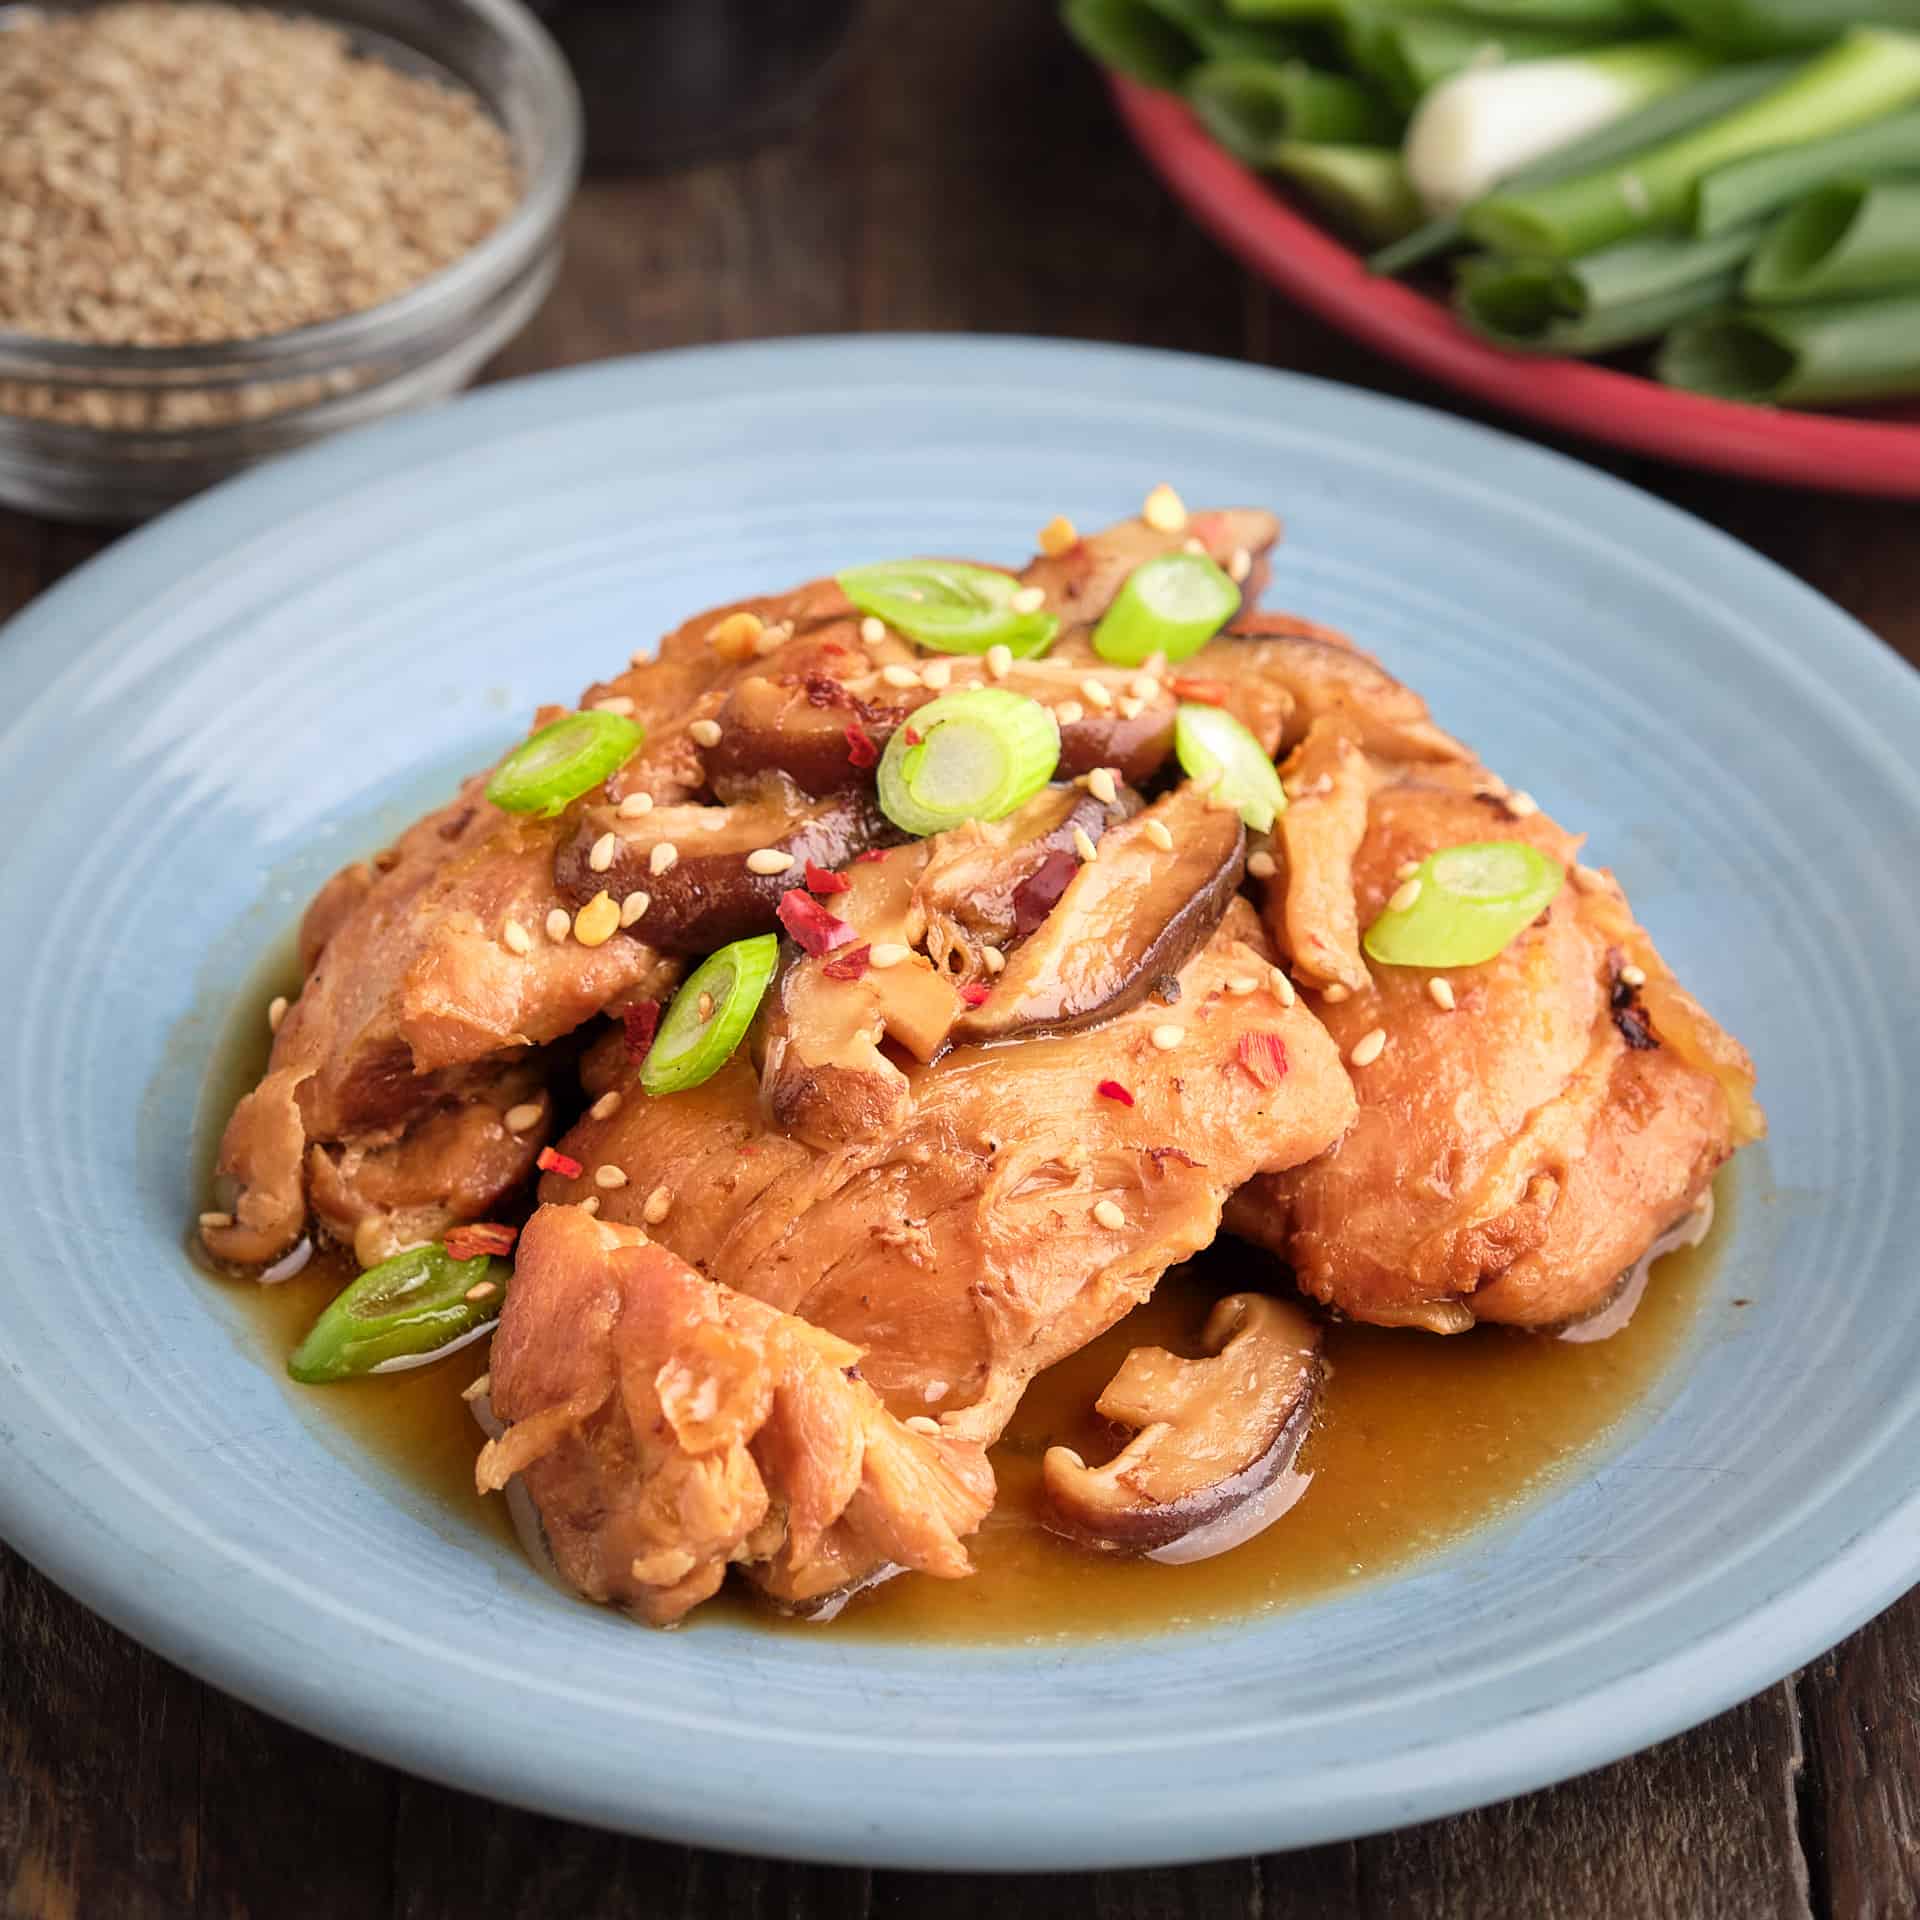 A plate of Chicken with Shiitake mushrooms, Sesame seeds and green onions